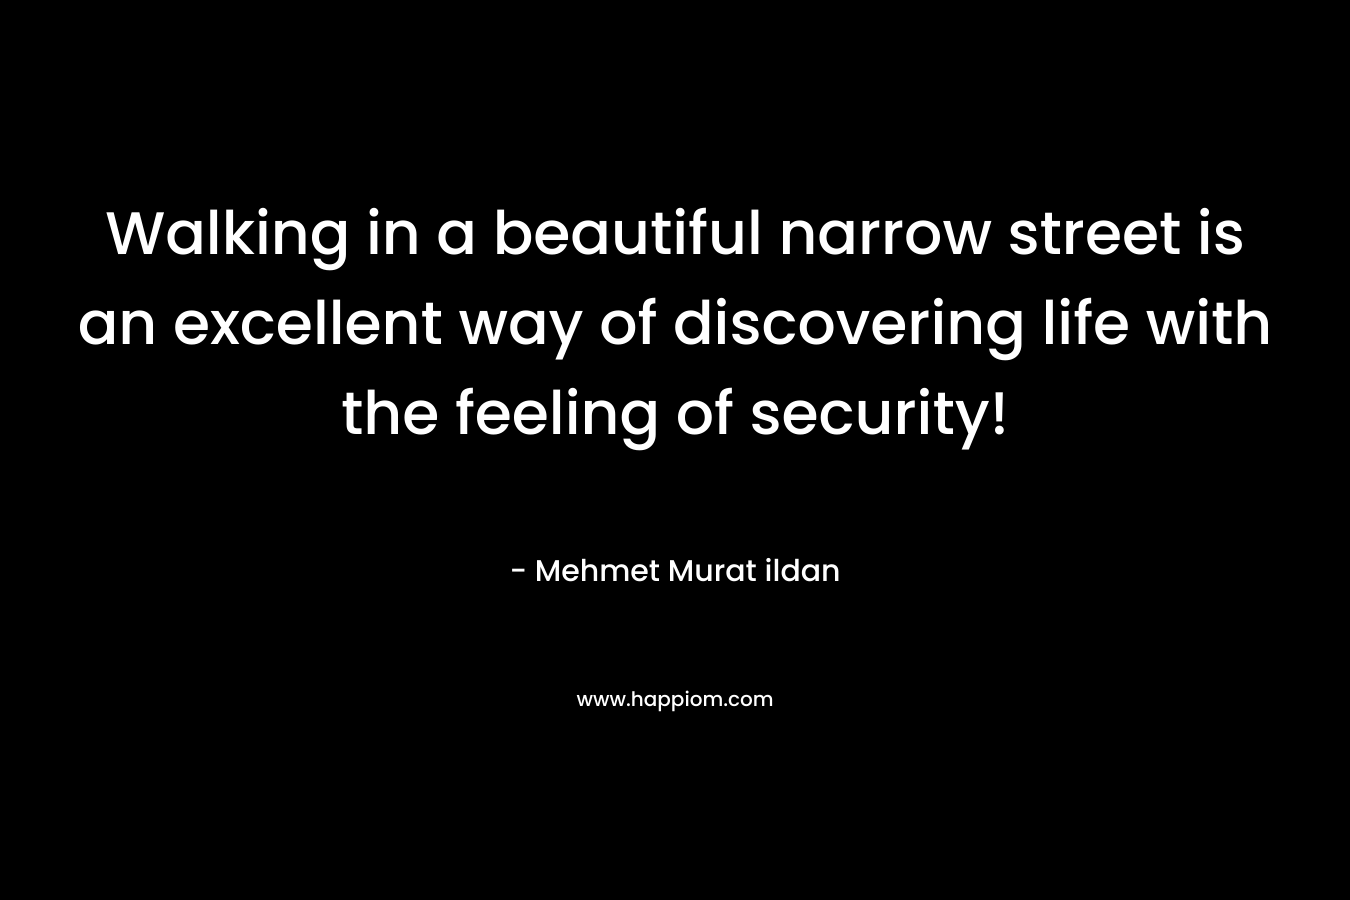 Walking in a beautiful narrow street is an excellent way of discovering life with the feeling of security! – Mehmet Murat ildan